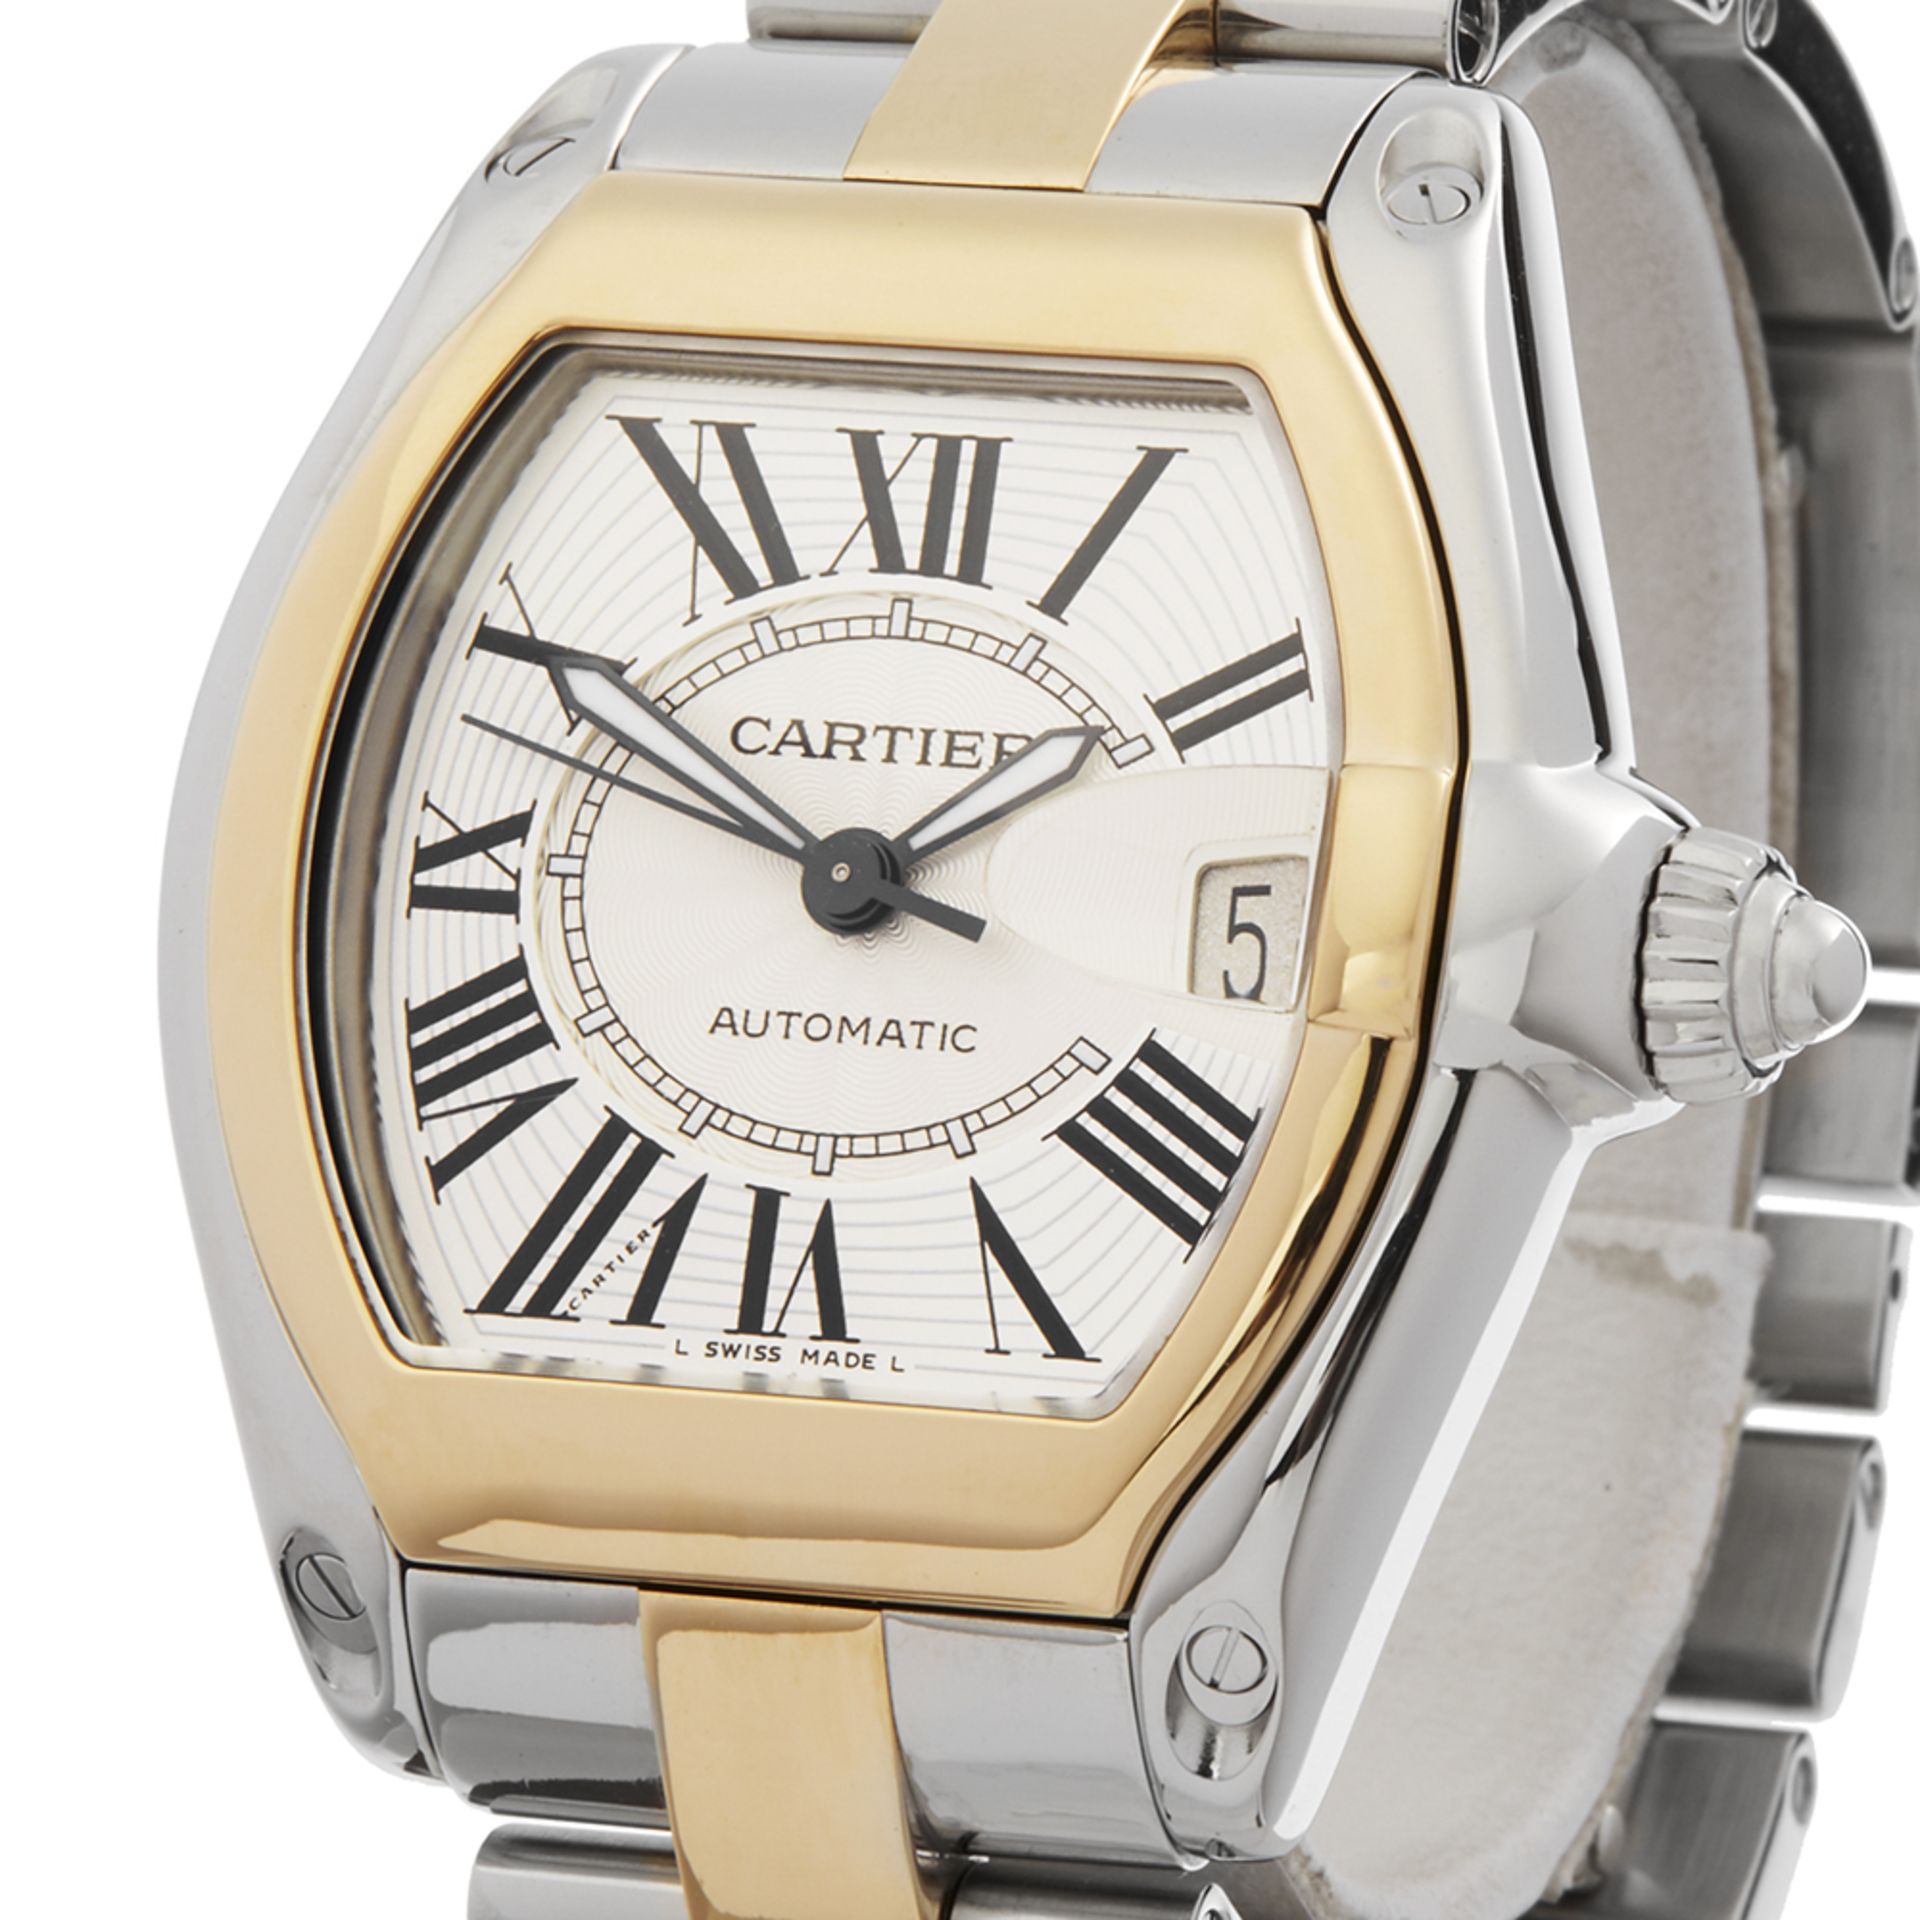 2010 Cartier Roadster Stainless Steel & 18K Yellow Gold - 2510 or W62031Y4 - Image 4 of 9